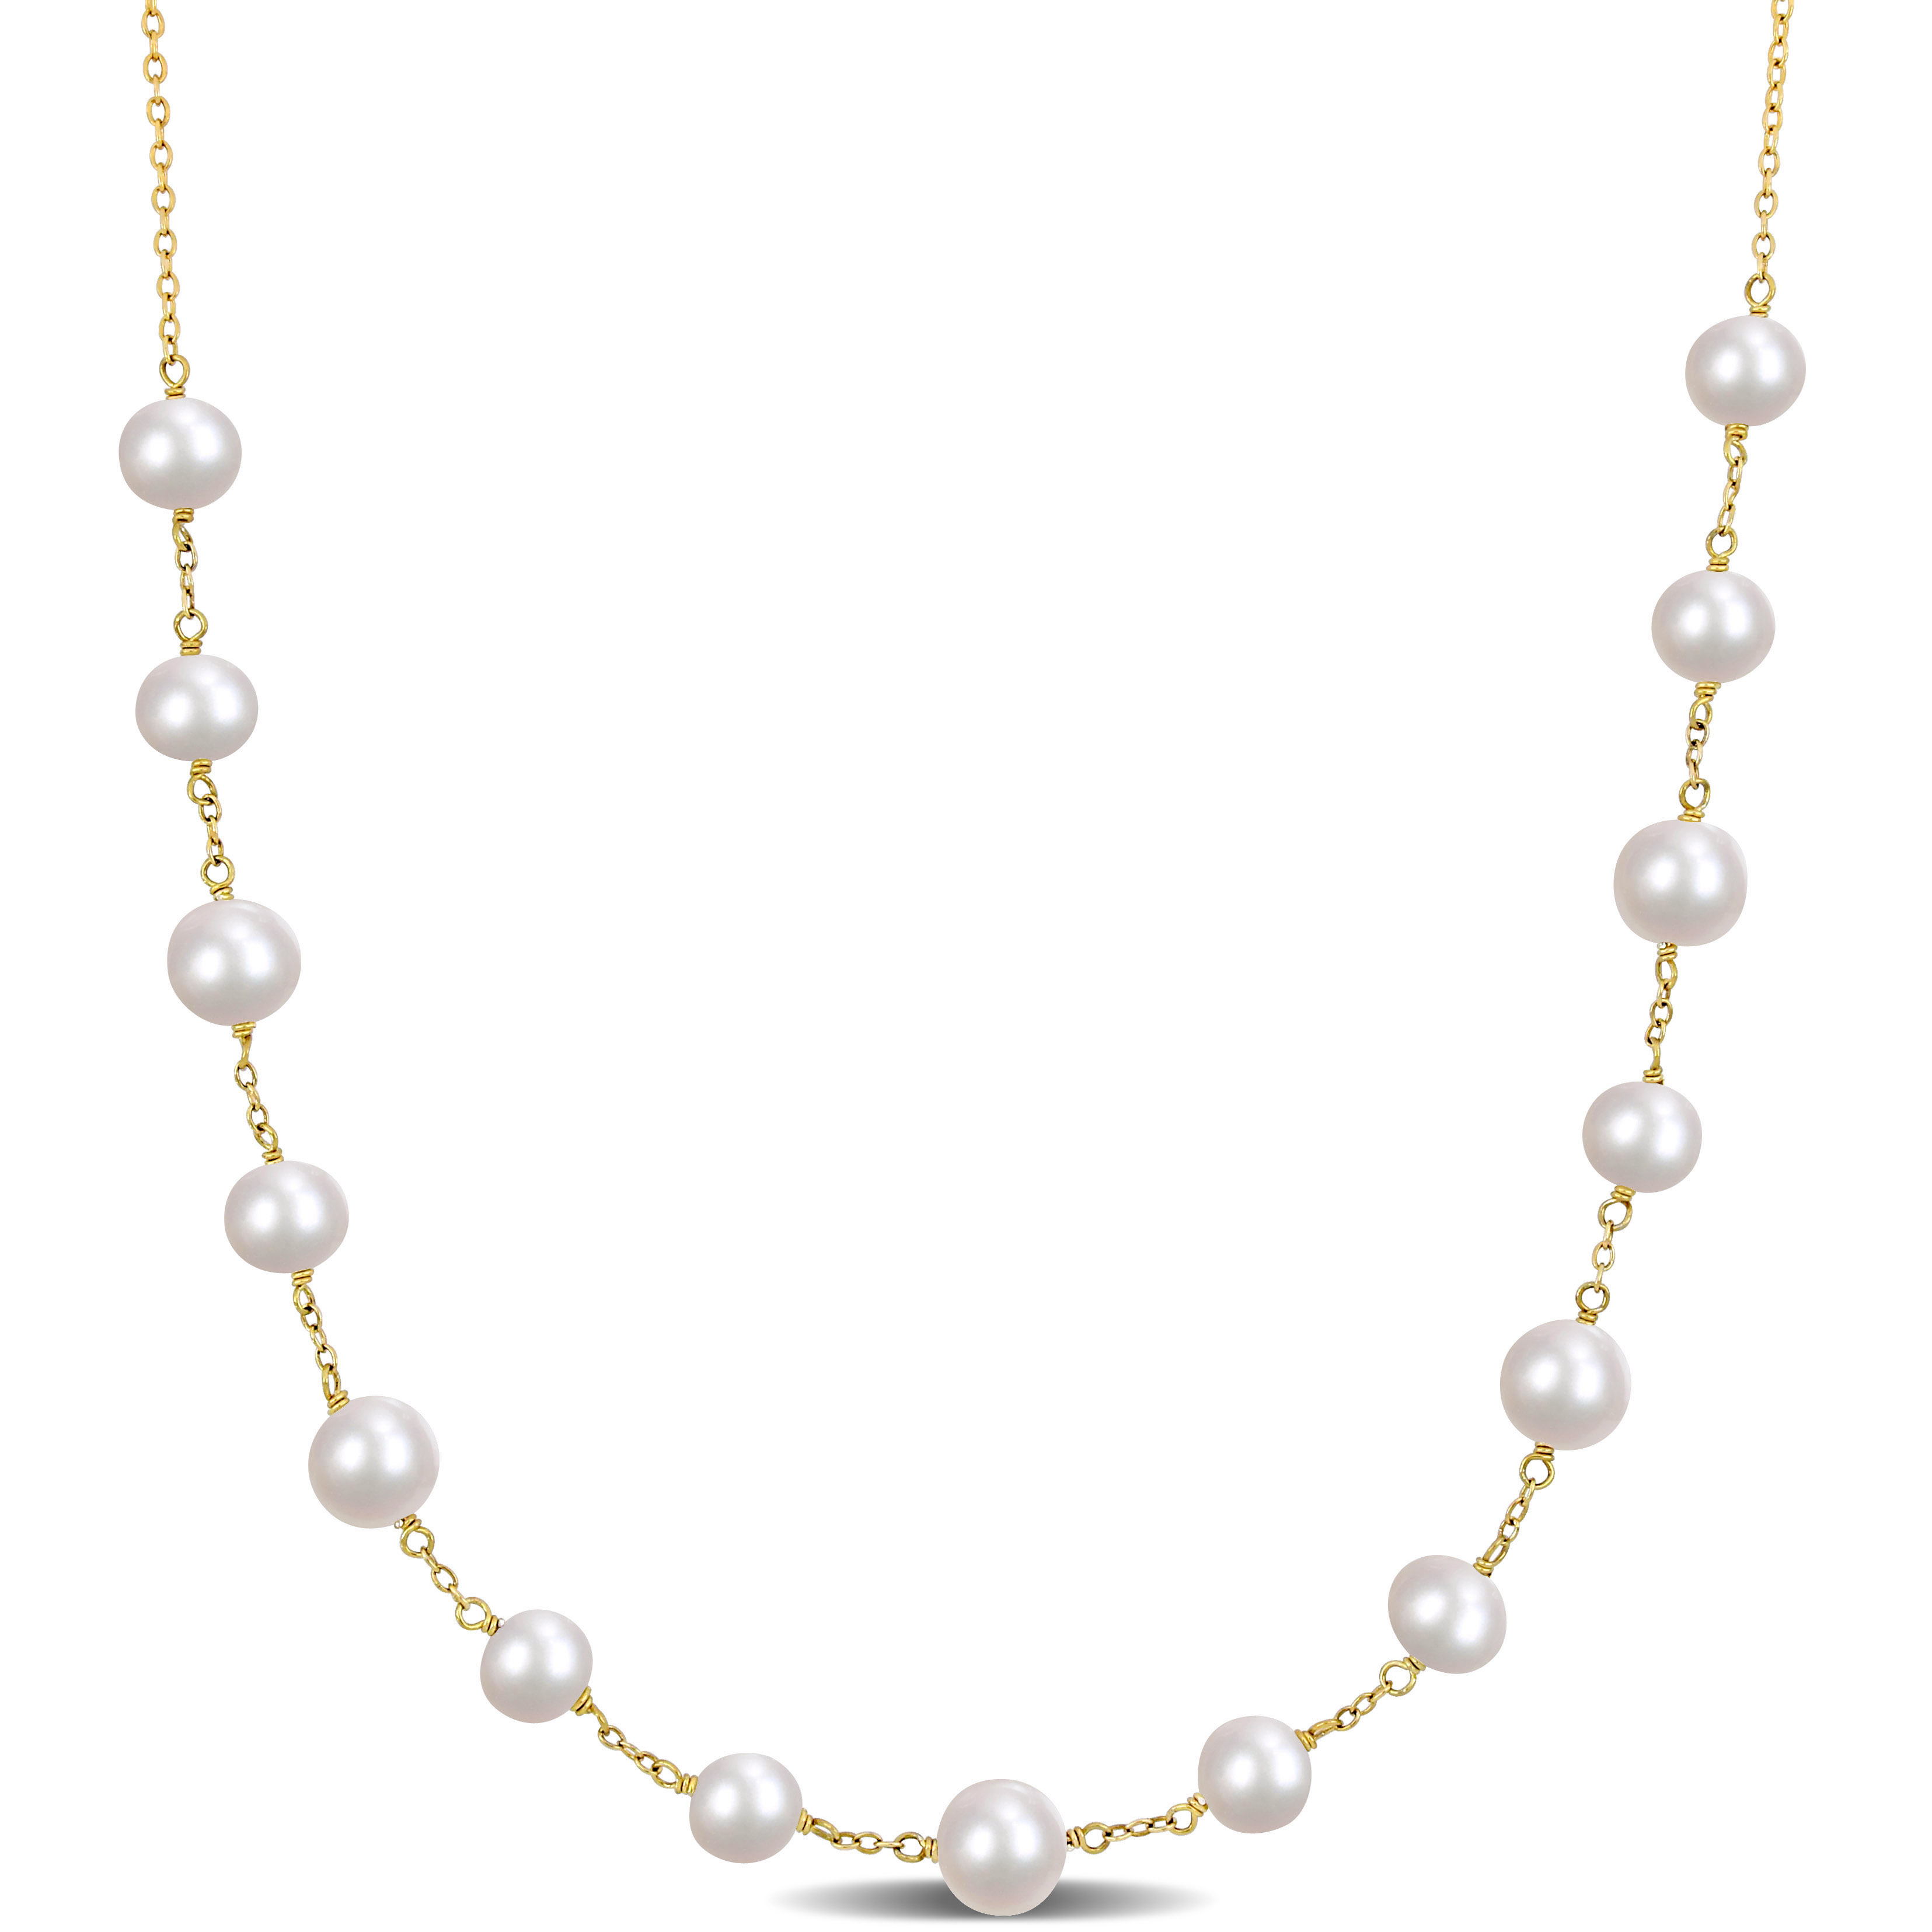 6.5-8.5 MM Cultured Freshwater Pearl Tin Cup Necklace in 18k Gold Plated Sterling Silver - 18 in